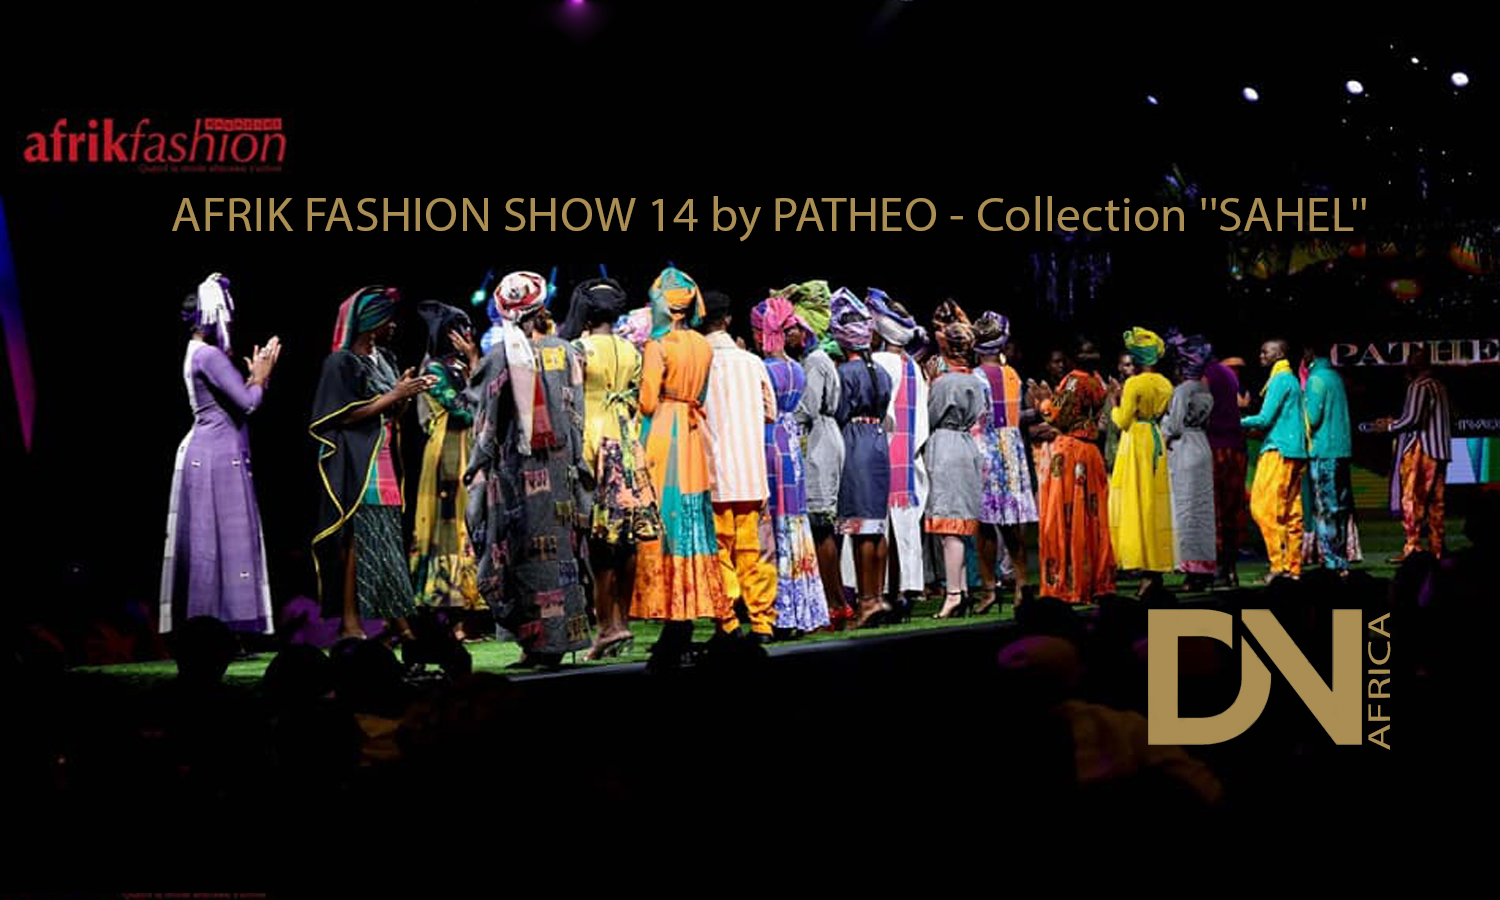 AFRICAN FASHION STYLE MAGAZINE - AFRIK FASHION SHOW 14 BY Isabelle Anoh & AVANT GARDE PRODUCTION -The-socio-professional-integration-of-the-girl - Designer Jacques LOGOH from Togo - Location Palais des Congres - Sofitel IVOIRE ABIDJAN Ivory Coast - Photographer DAN NGU - Media Partner DN AFRICA - STUDIO 24 NIGERIA - STUDIO 24 INTERNATIONAL - Ifeanyi Christopher Oputa MD AND CEO OF COLVI LIMITED AND STUDIO 24 - Nahomie NOOR COULIBALY